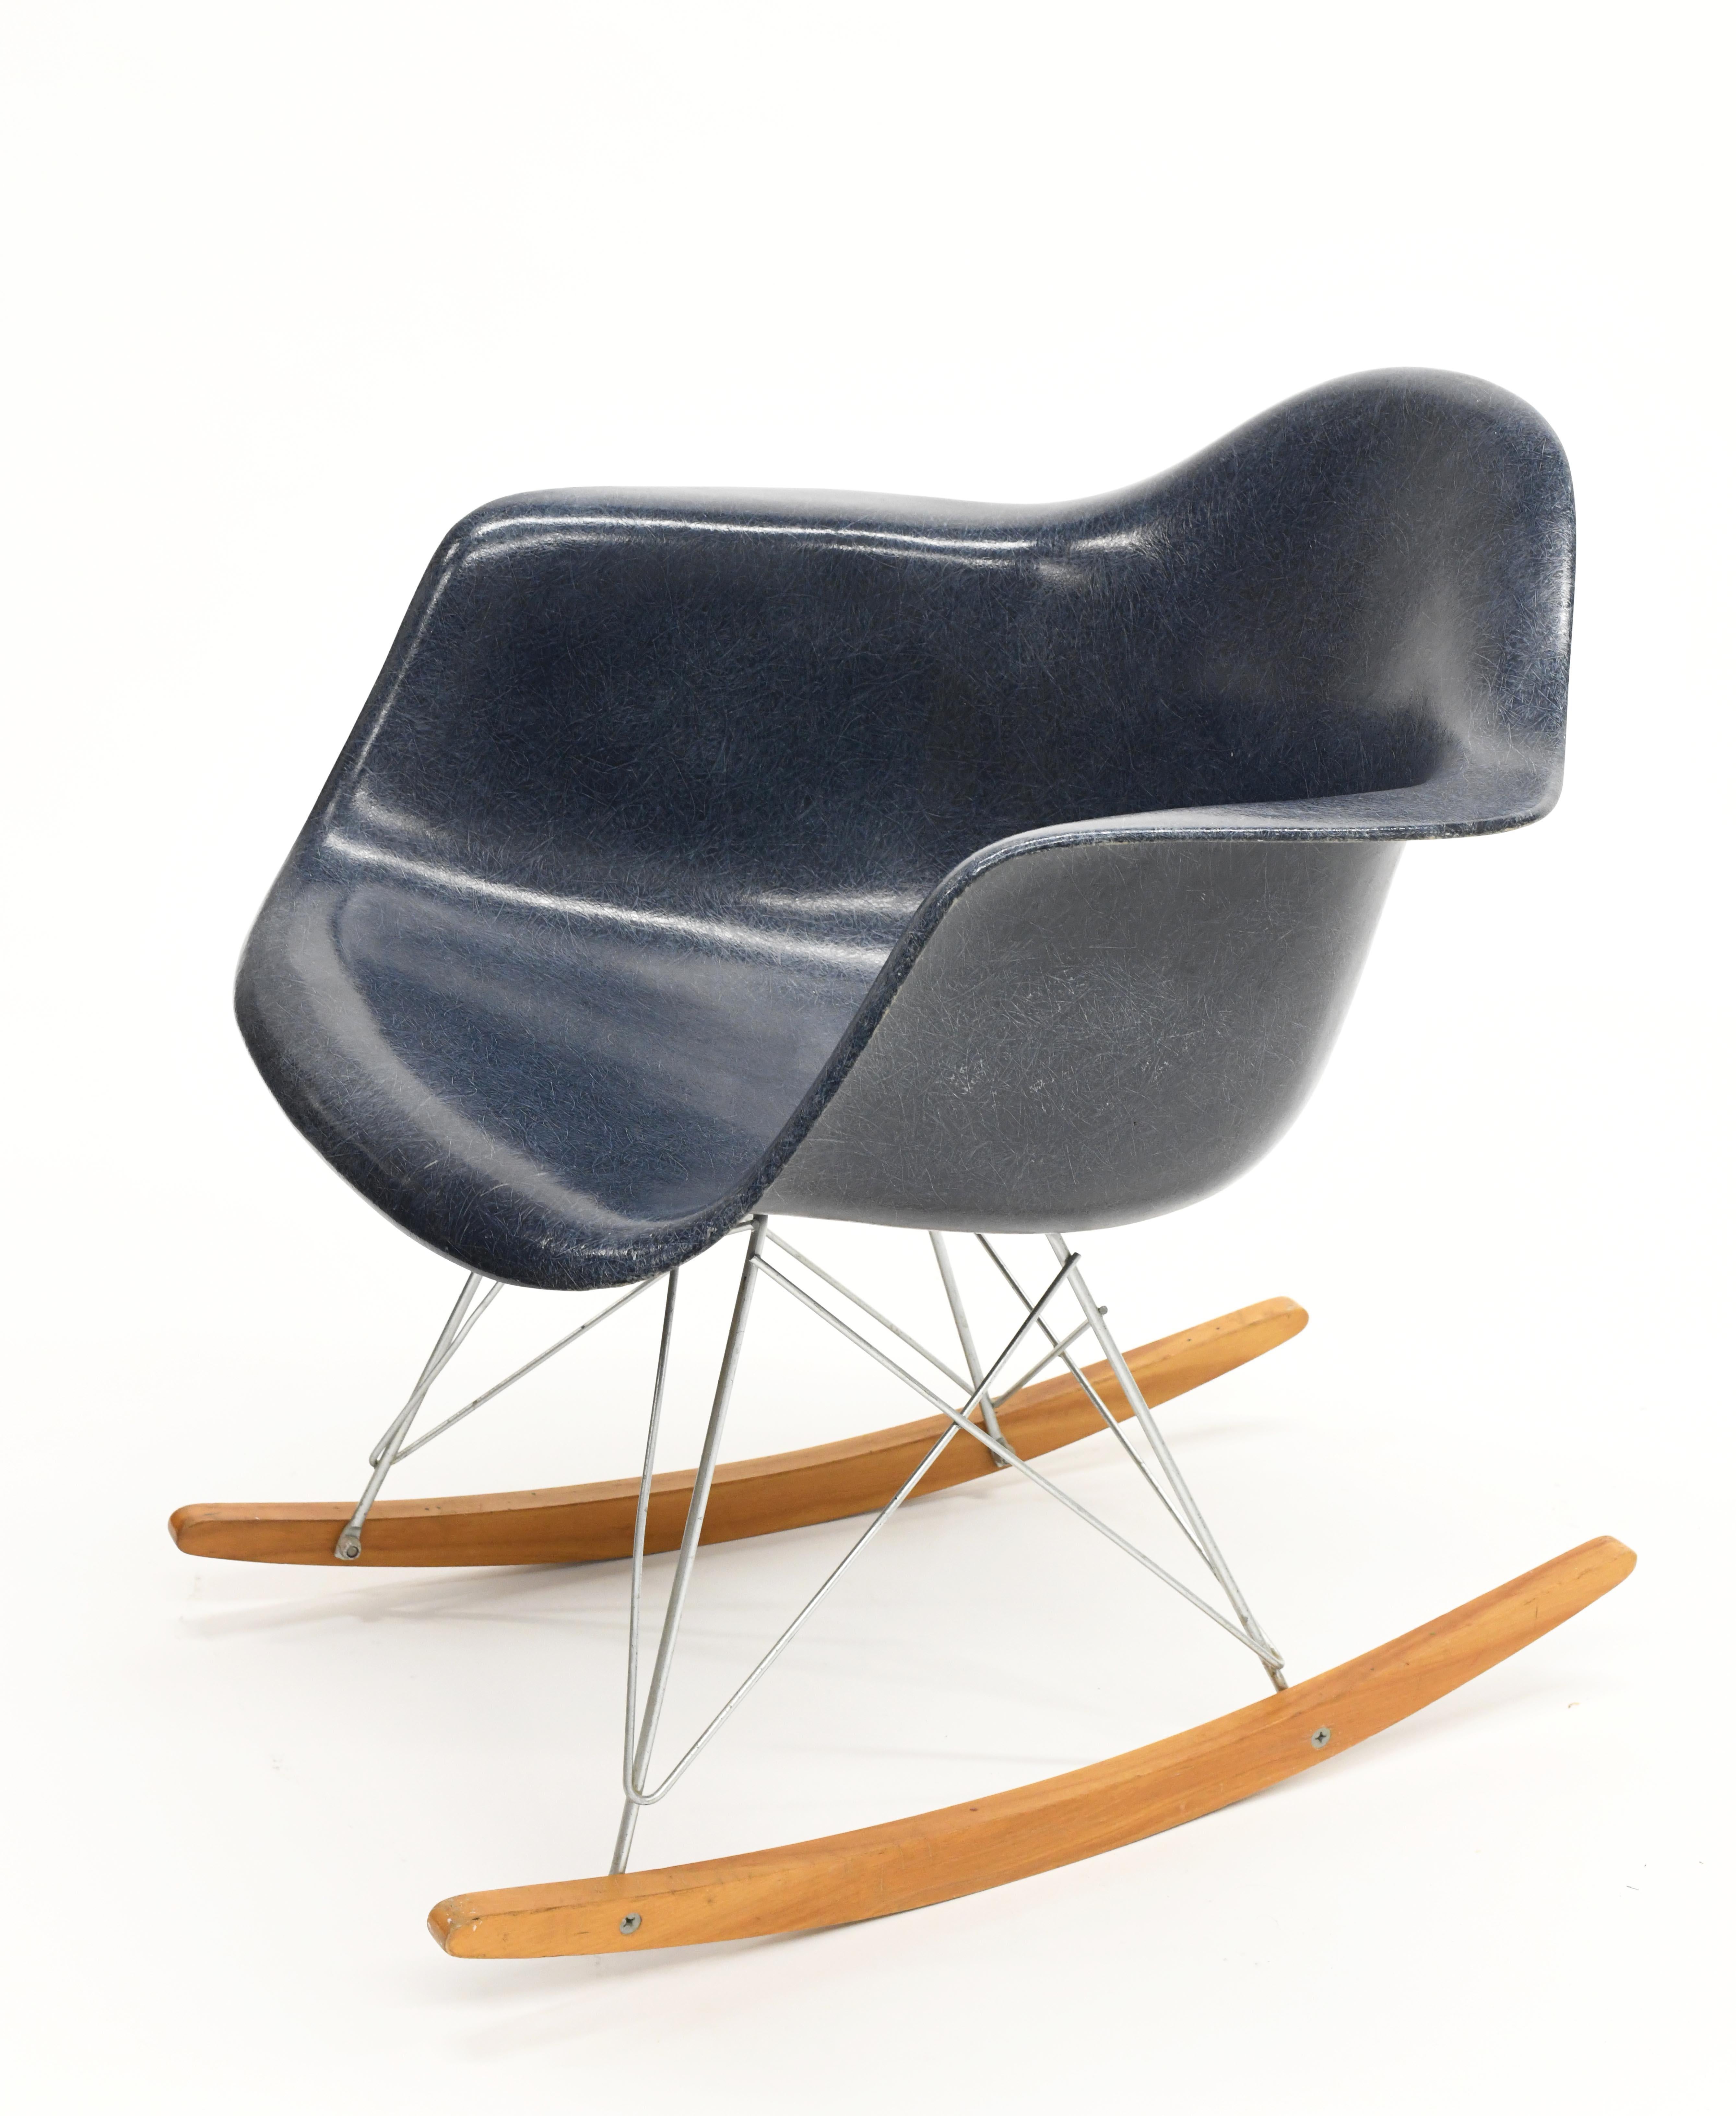 Original vintage rocking chair by Charles & Ray Eames for Herman Miller. Base is original and not a replica. Shock mounts are in good shape. The chair was acquired from Herman Miller in 1962.